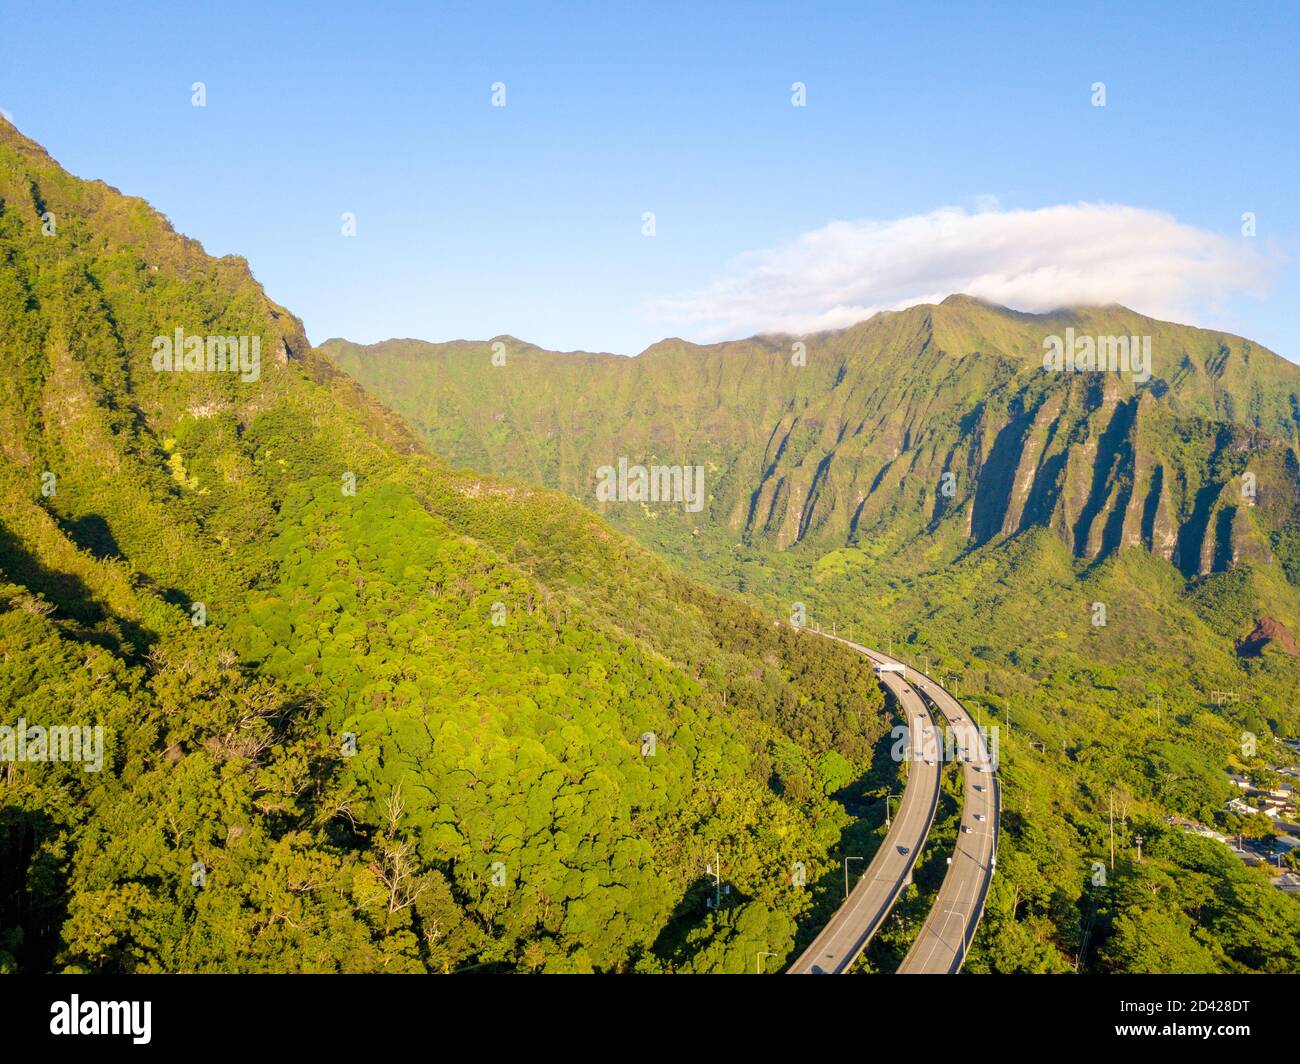 Beautiful shot of the green mountain landscape of the famous Haiku stairs in Kaneohe, Hawaii Stock Photo